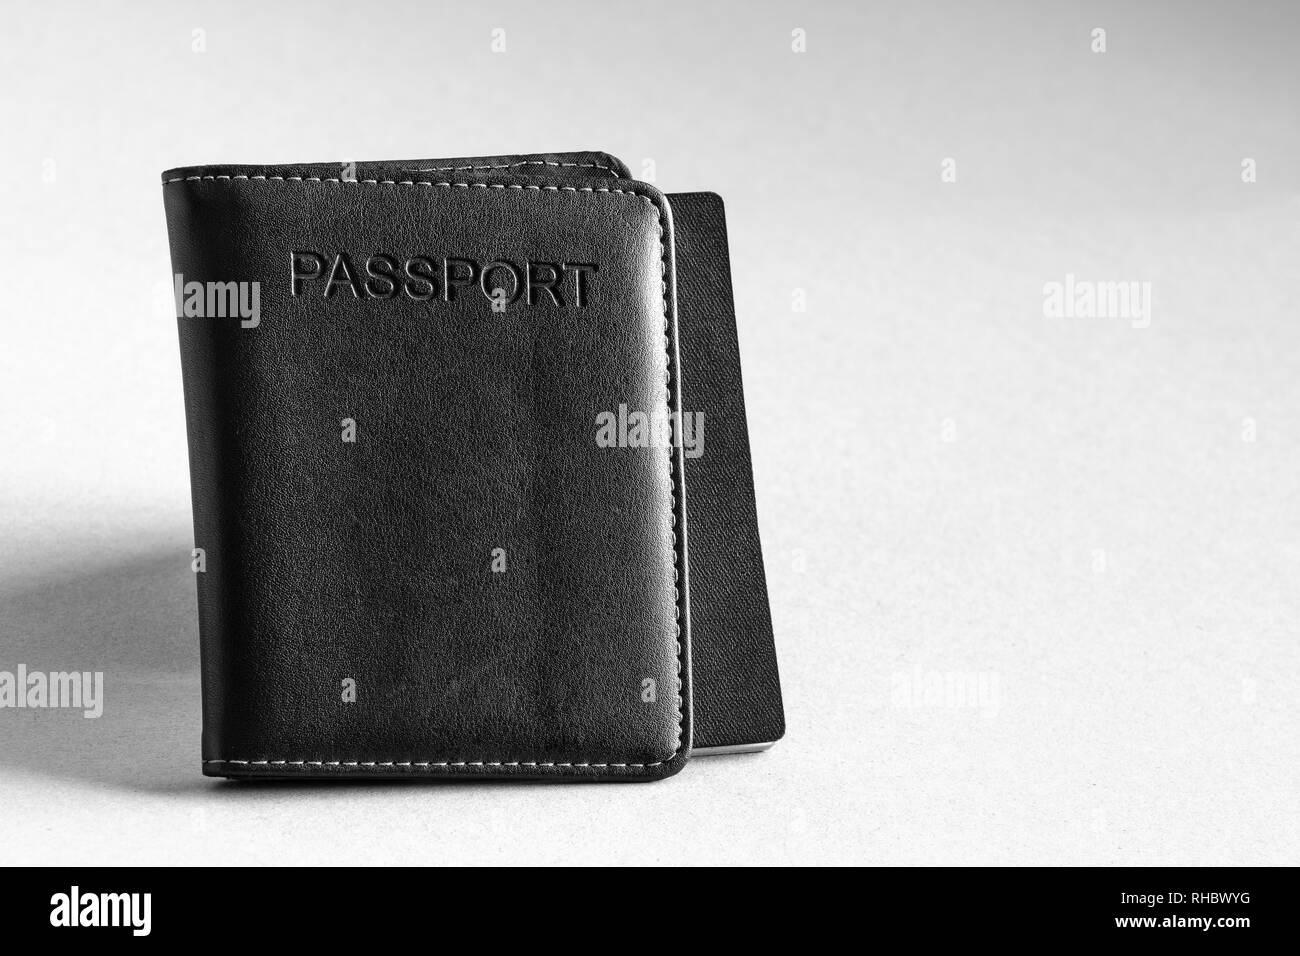 Black leather passport holder with passport inside isolated on background Stock Photo